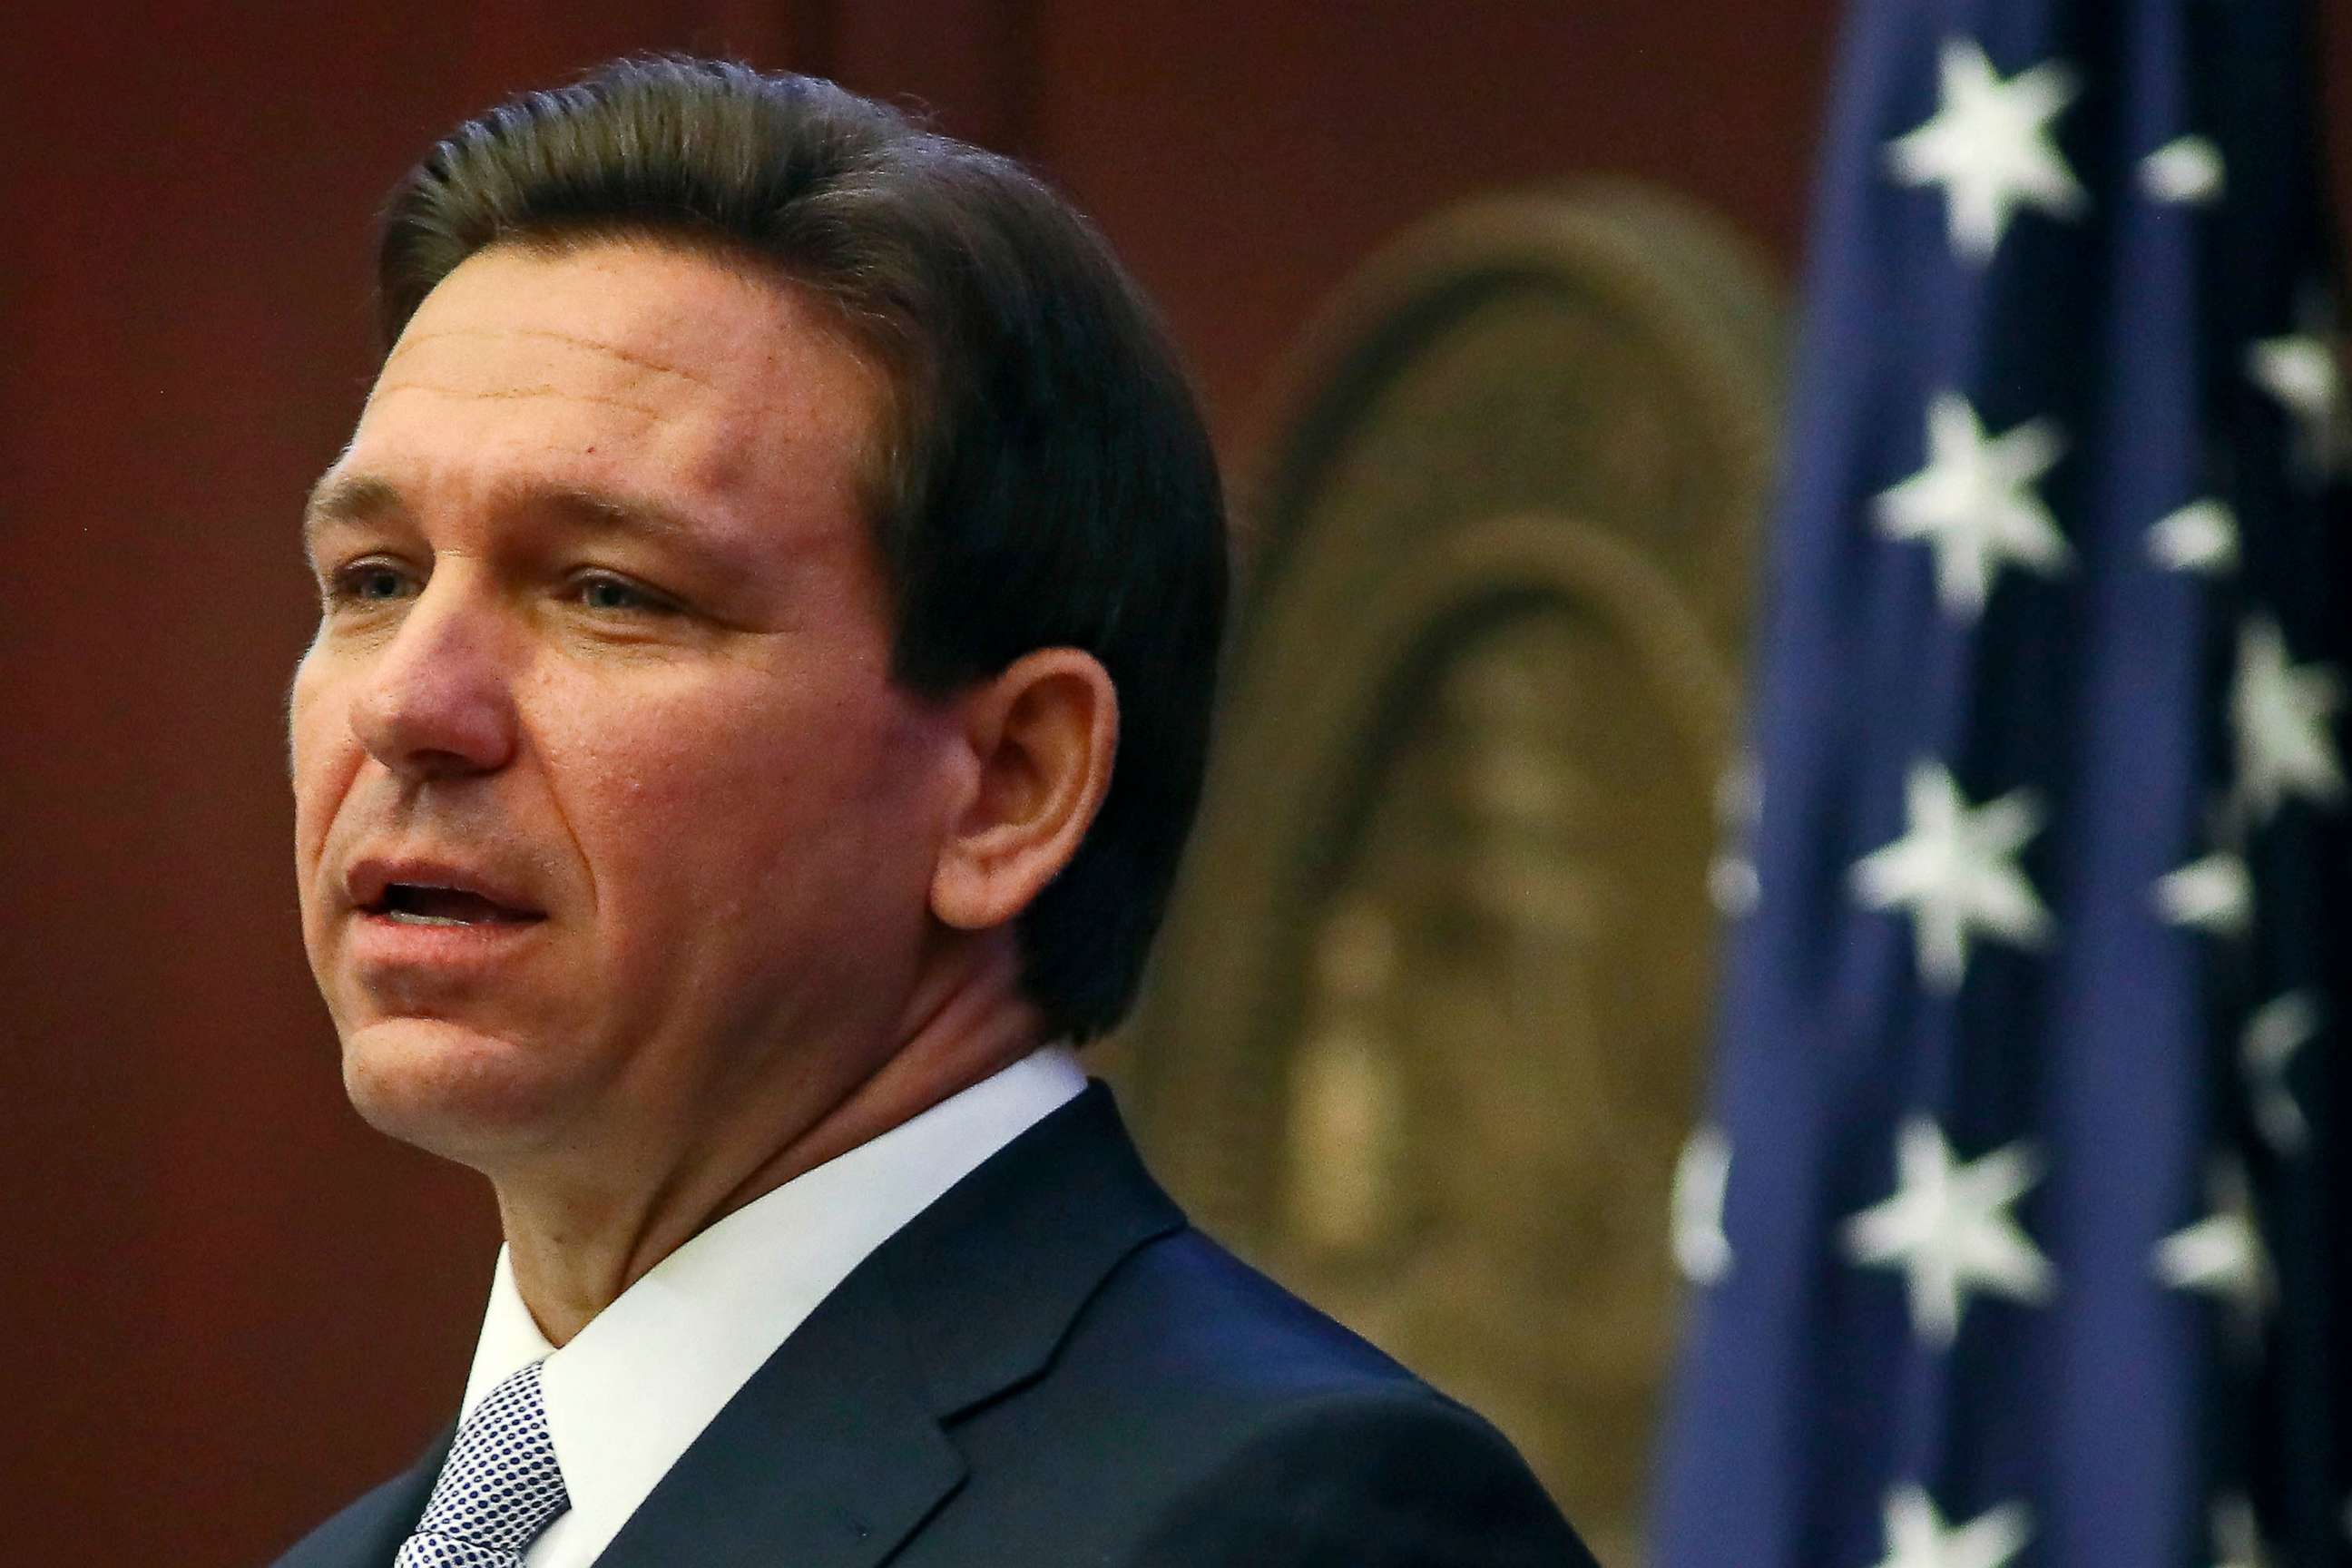 PHOTO: Florida Gov. Ron DeSantis gives his State of the State address during a joint session of the Senate and House of Representatives, March 7, 2023, at the Capitol in Tallahassee, Fla.